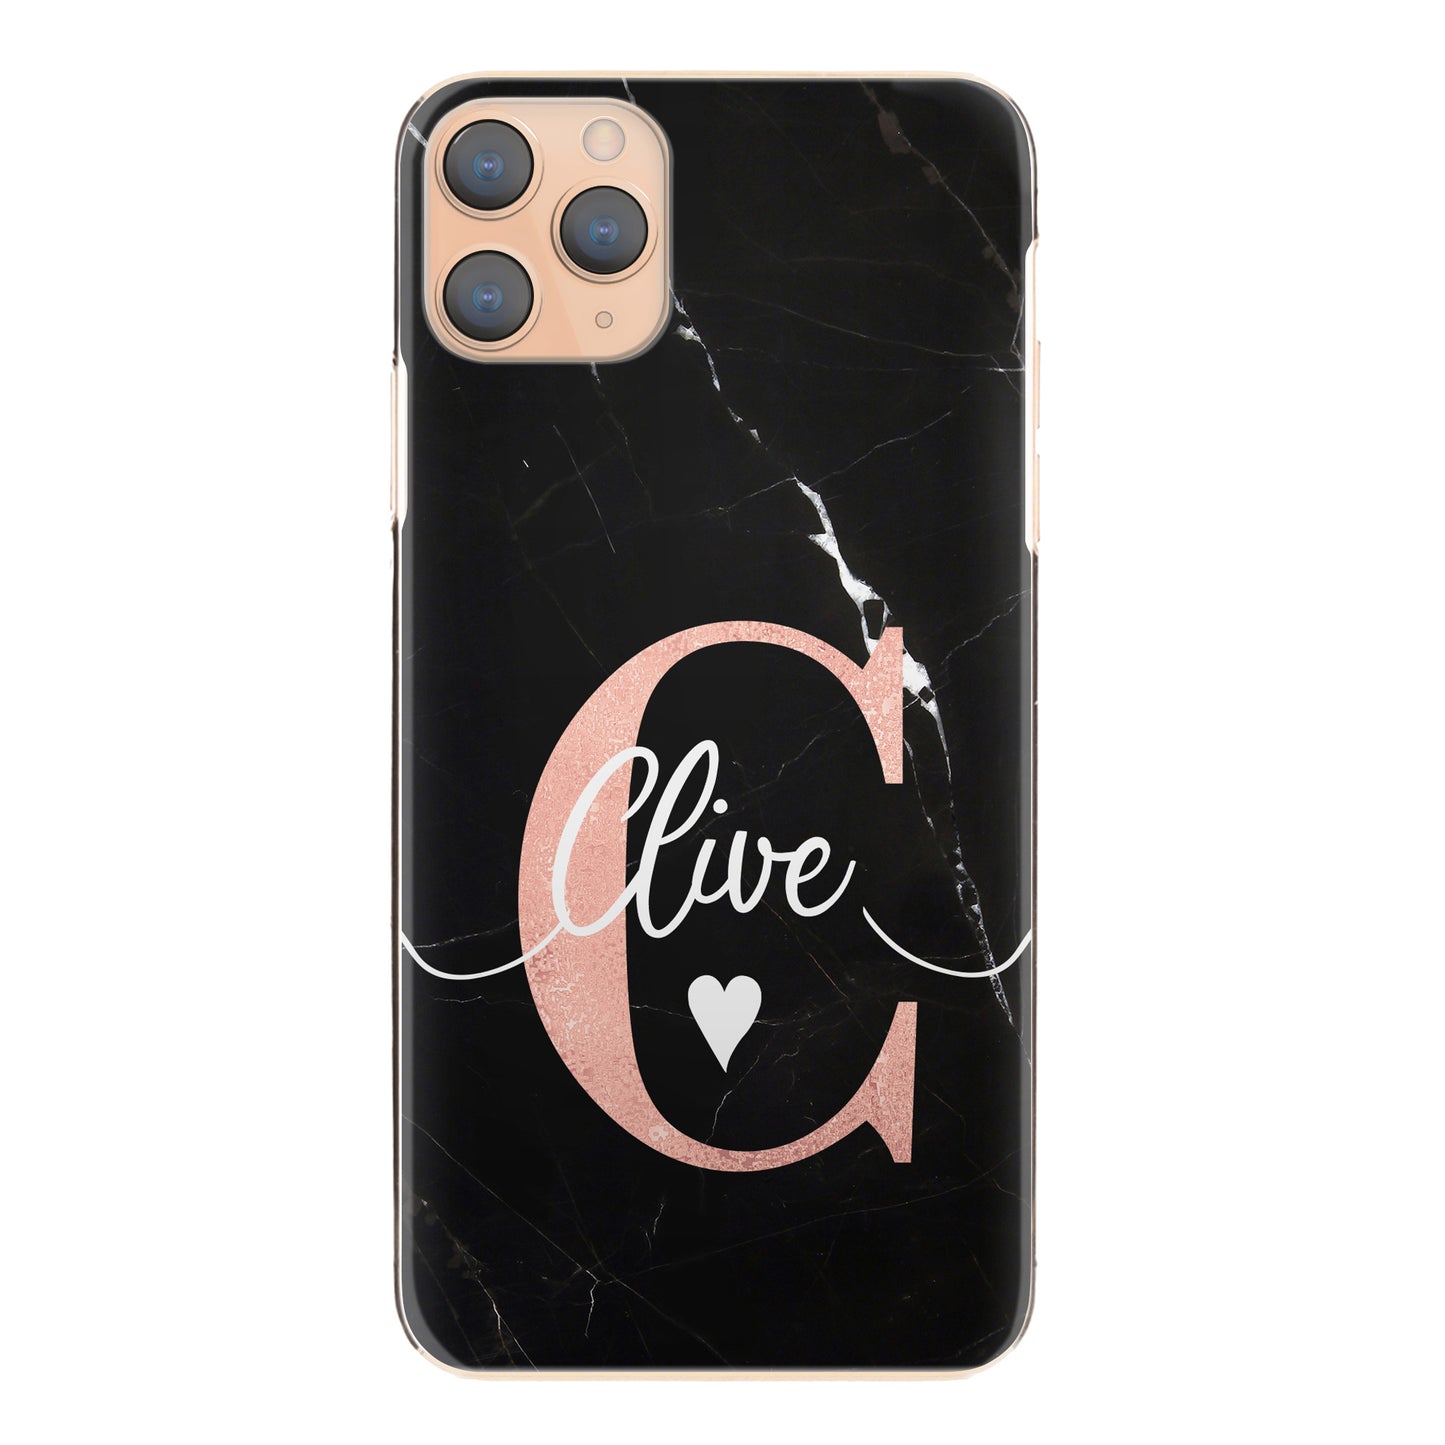 Personalised Nokia Phone Hard Case with Stylish Heart Text and Pink Initial on White Infused Black Marble